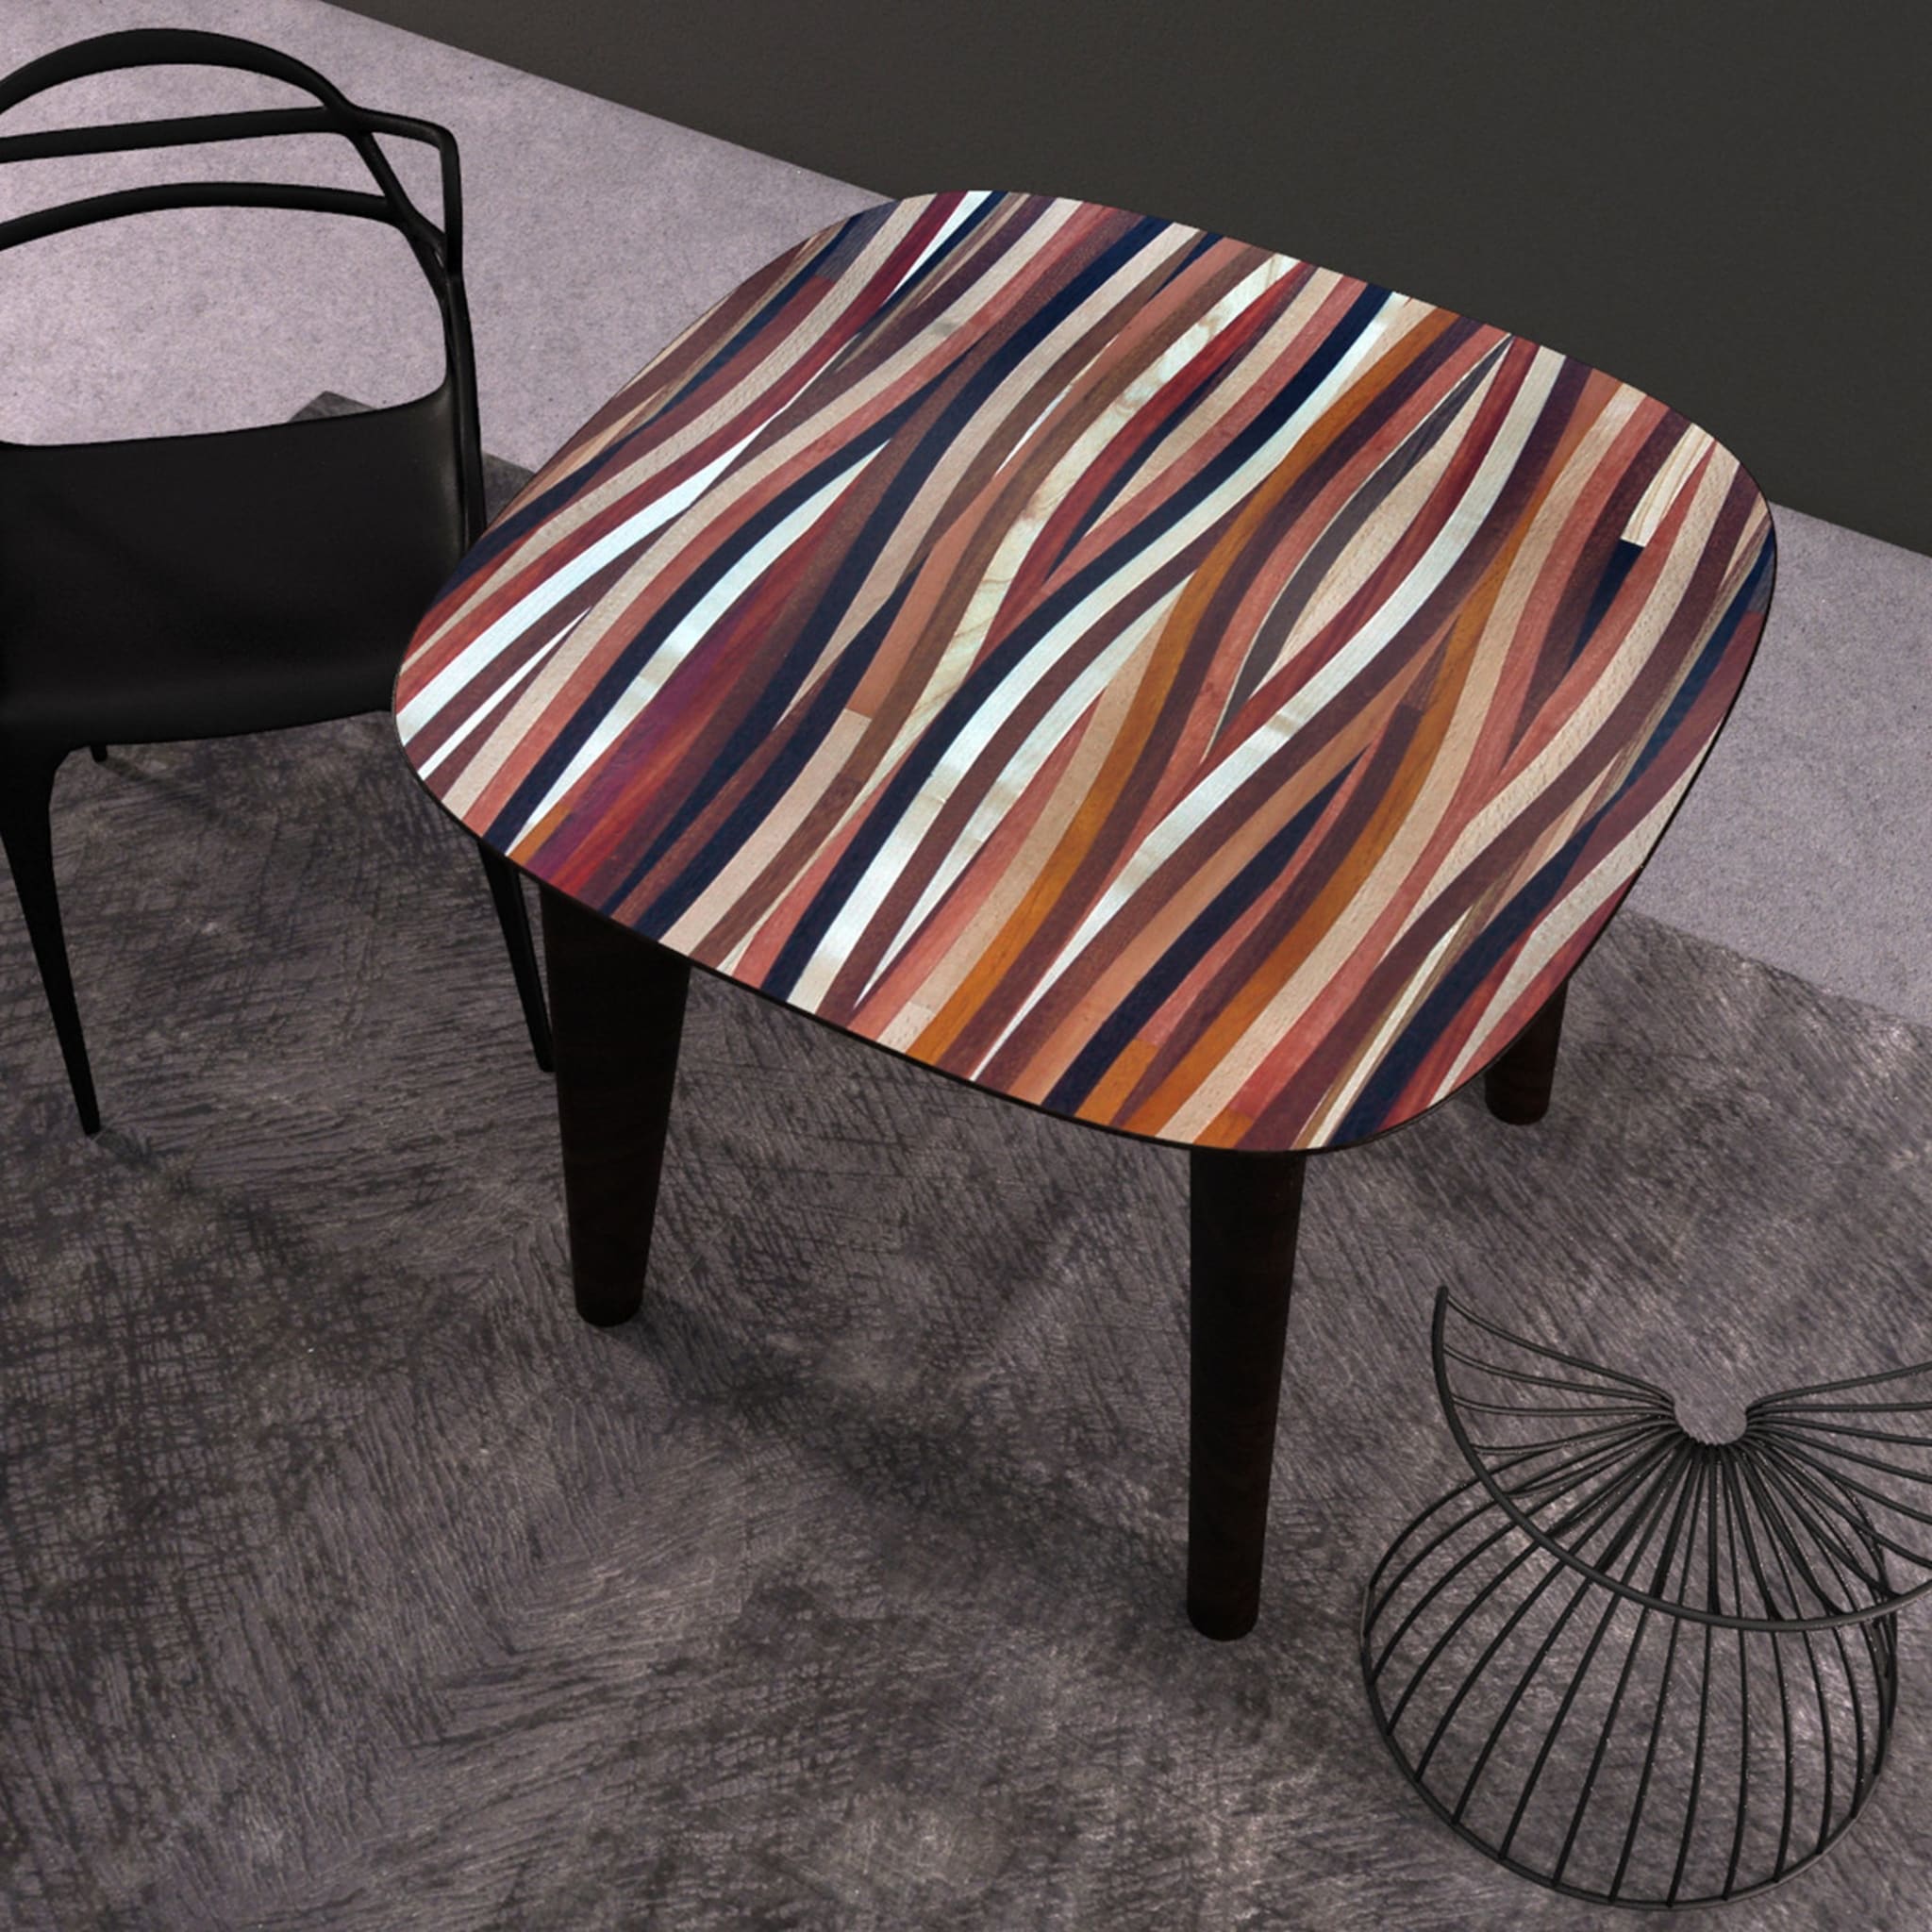 Multiessenza Square Bistro Table by Gabriele E. M. D'Angelo - Alternative view 3